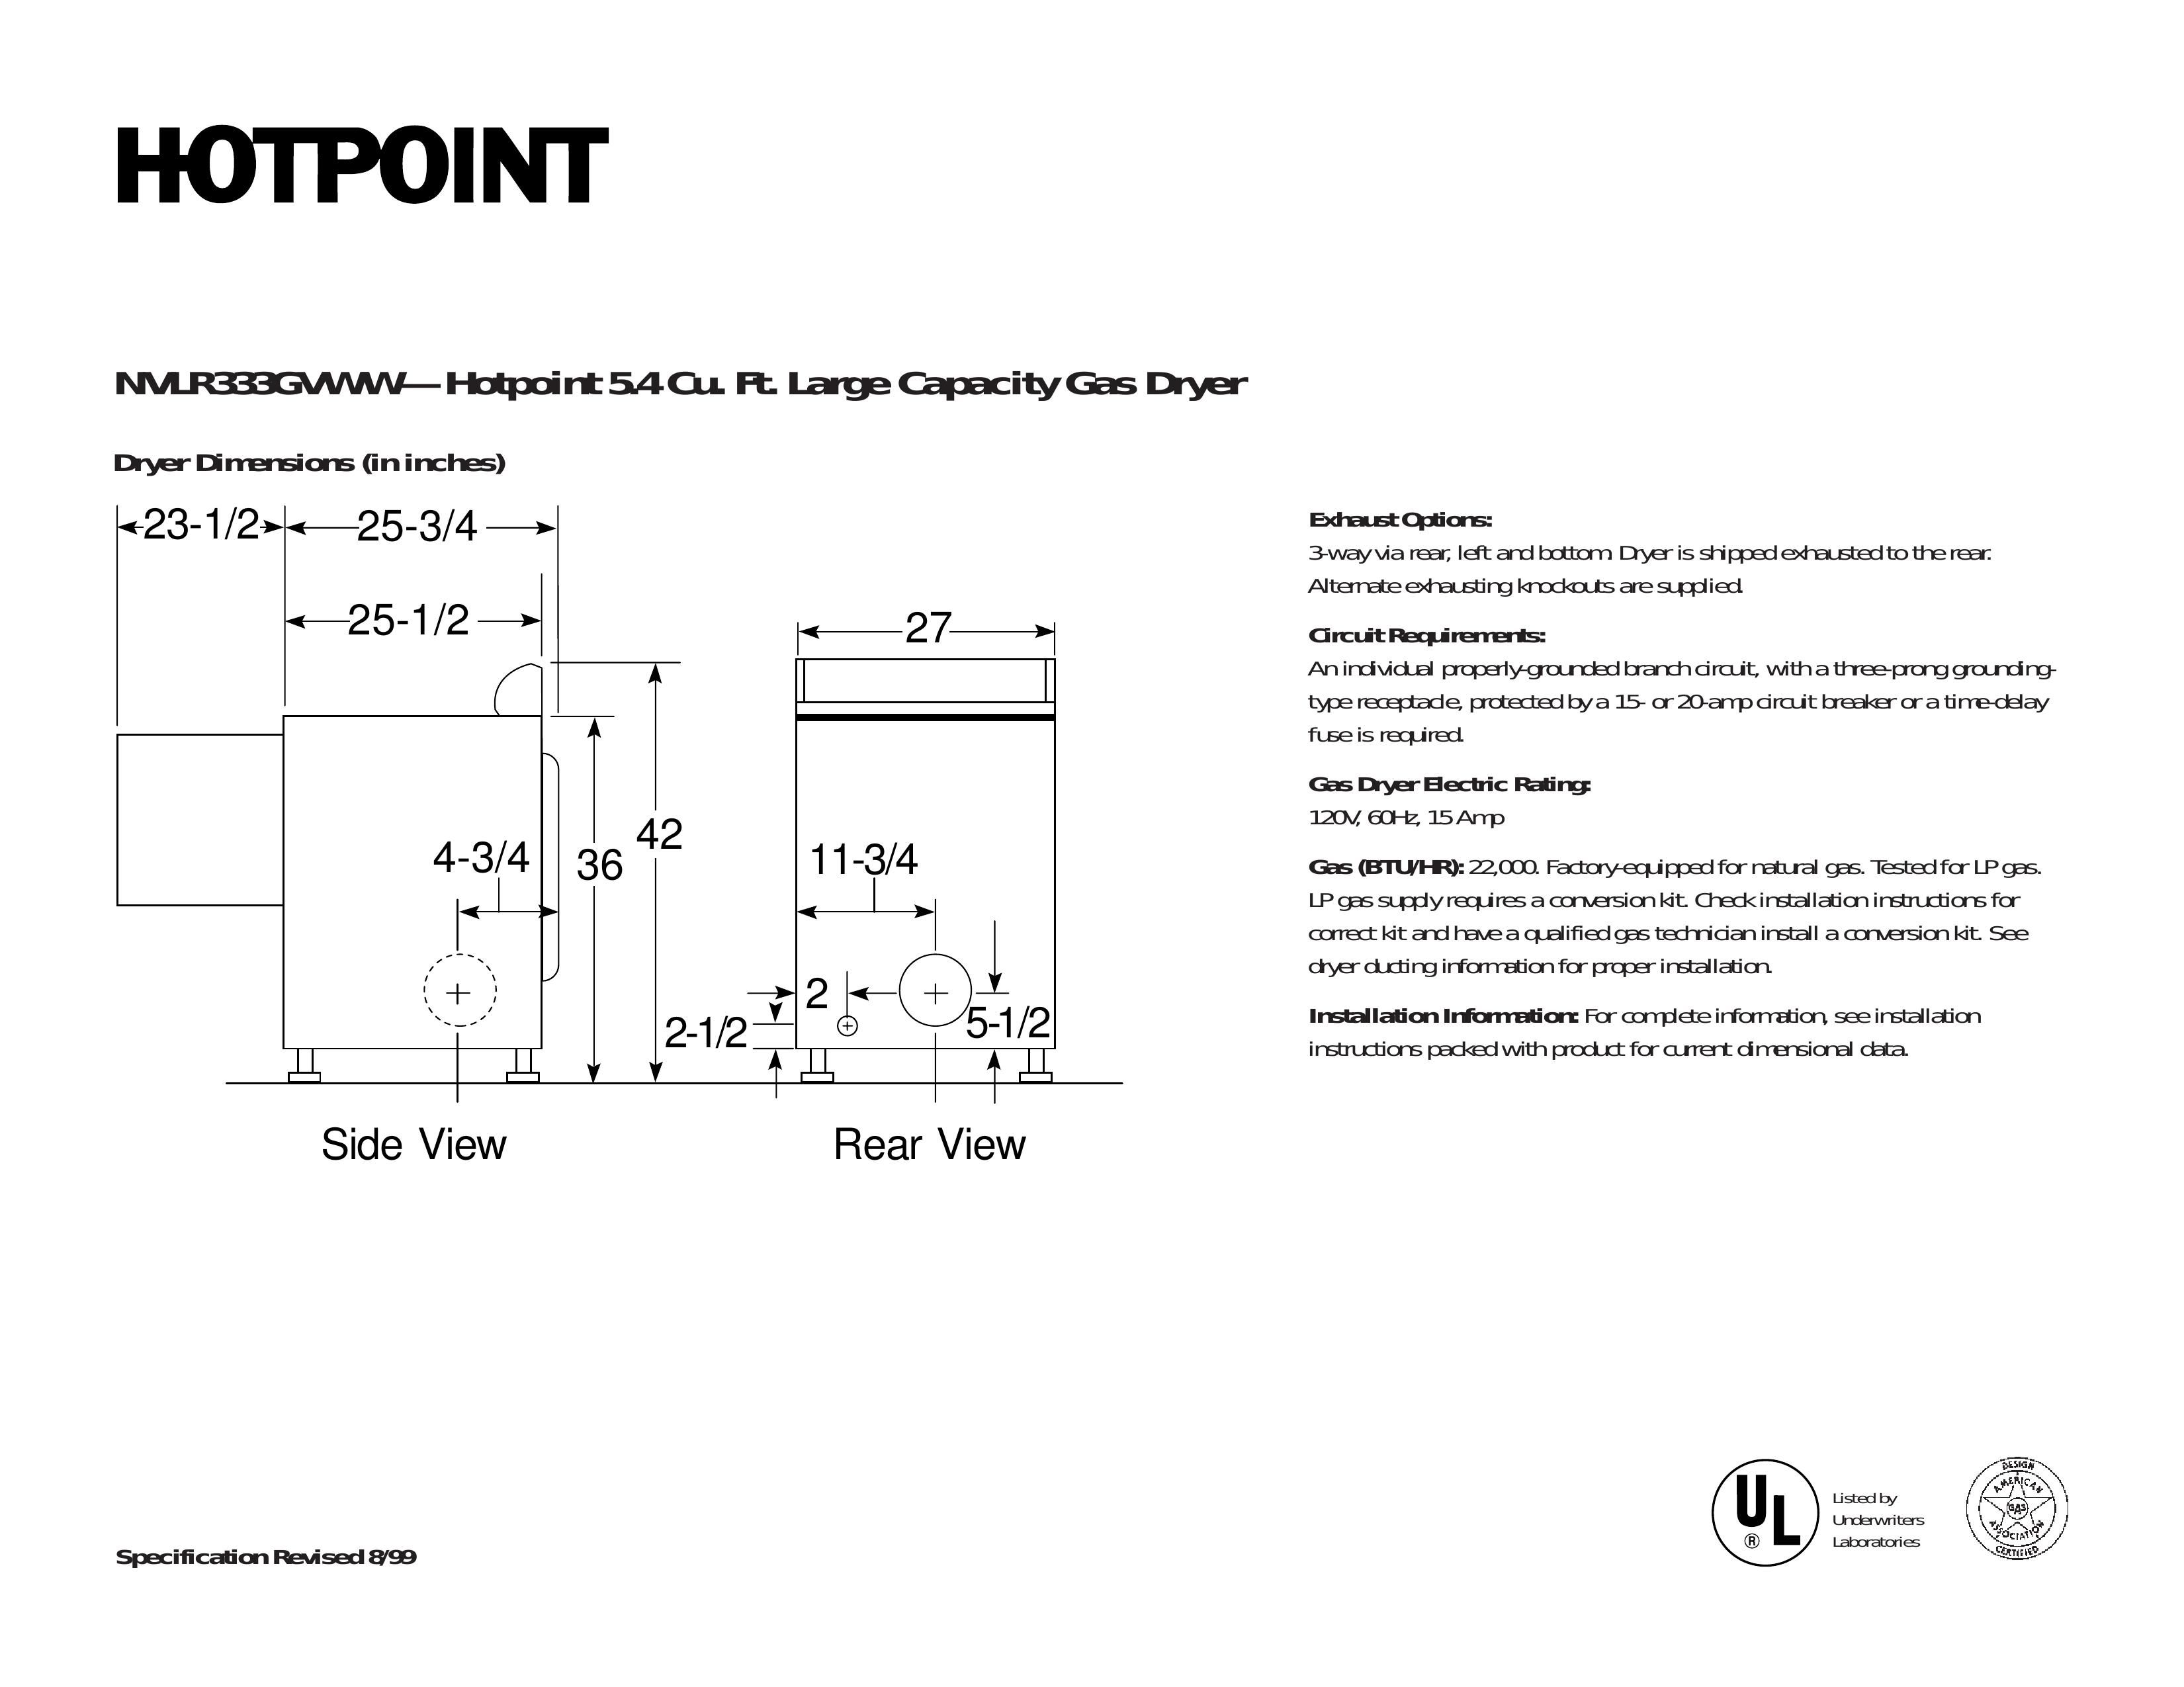 Hotpoint NVLR333GVAA Clothes Dryer User Manual